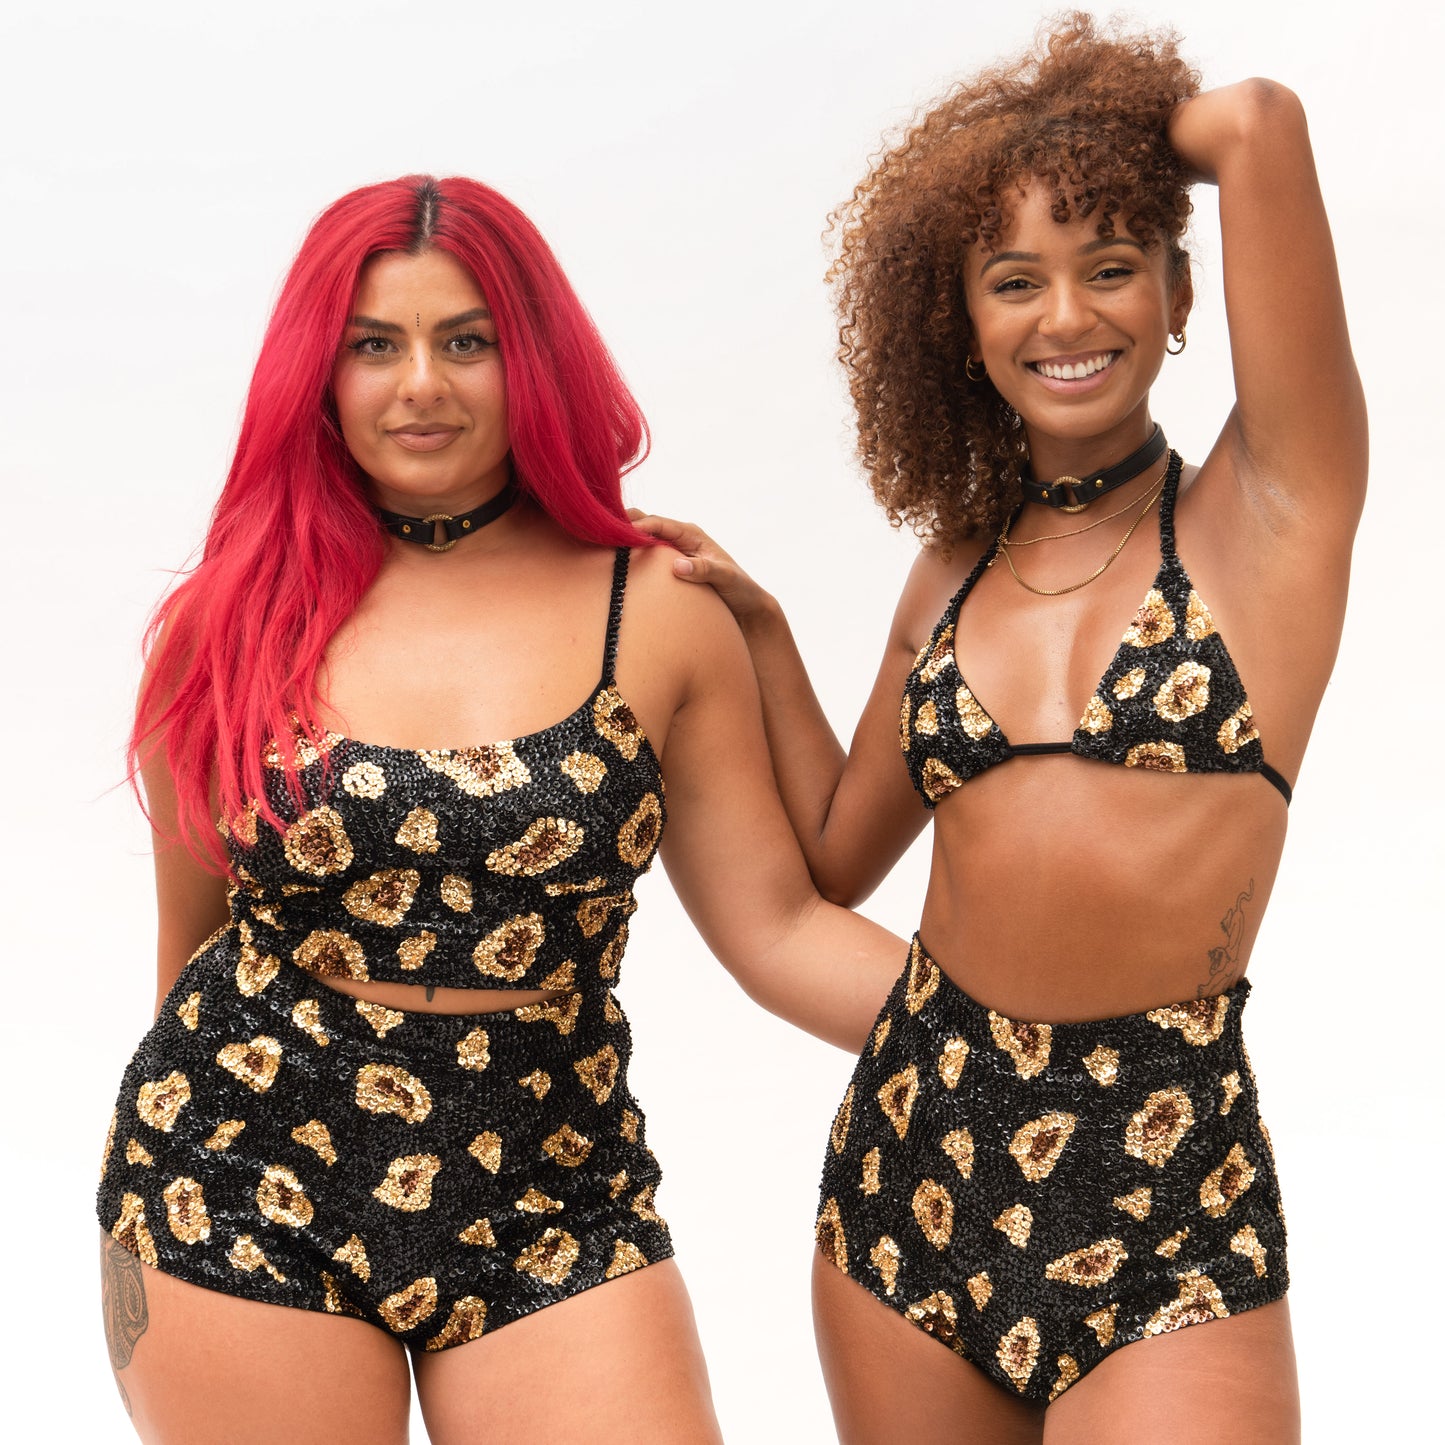 matching festival sets for burning man and Coachella outfits in leopard animal print 